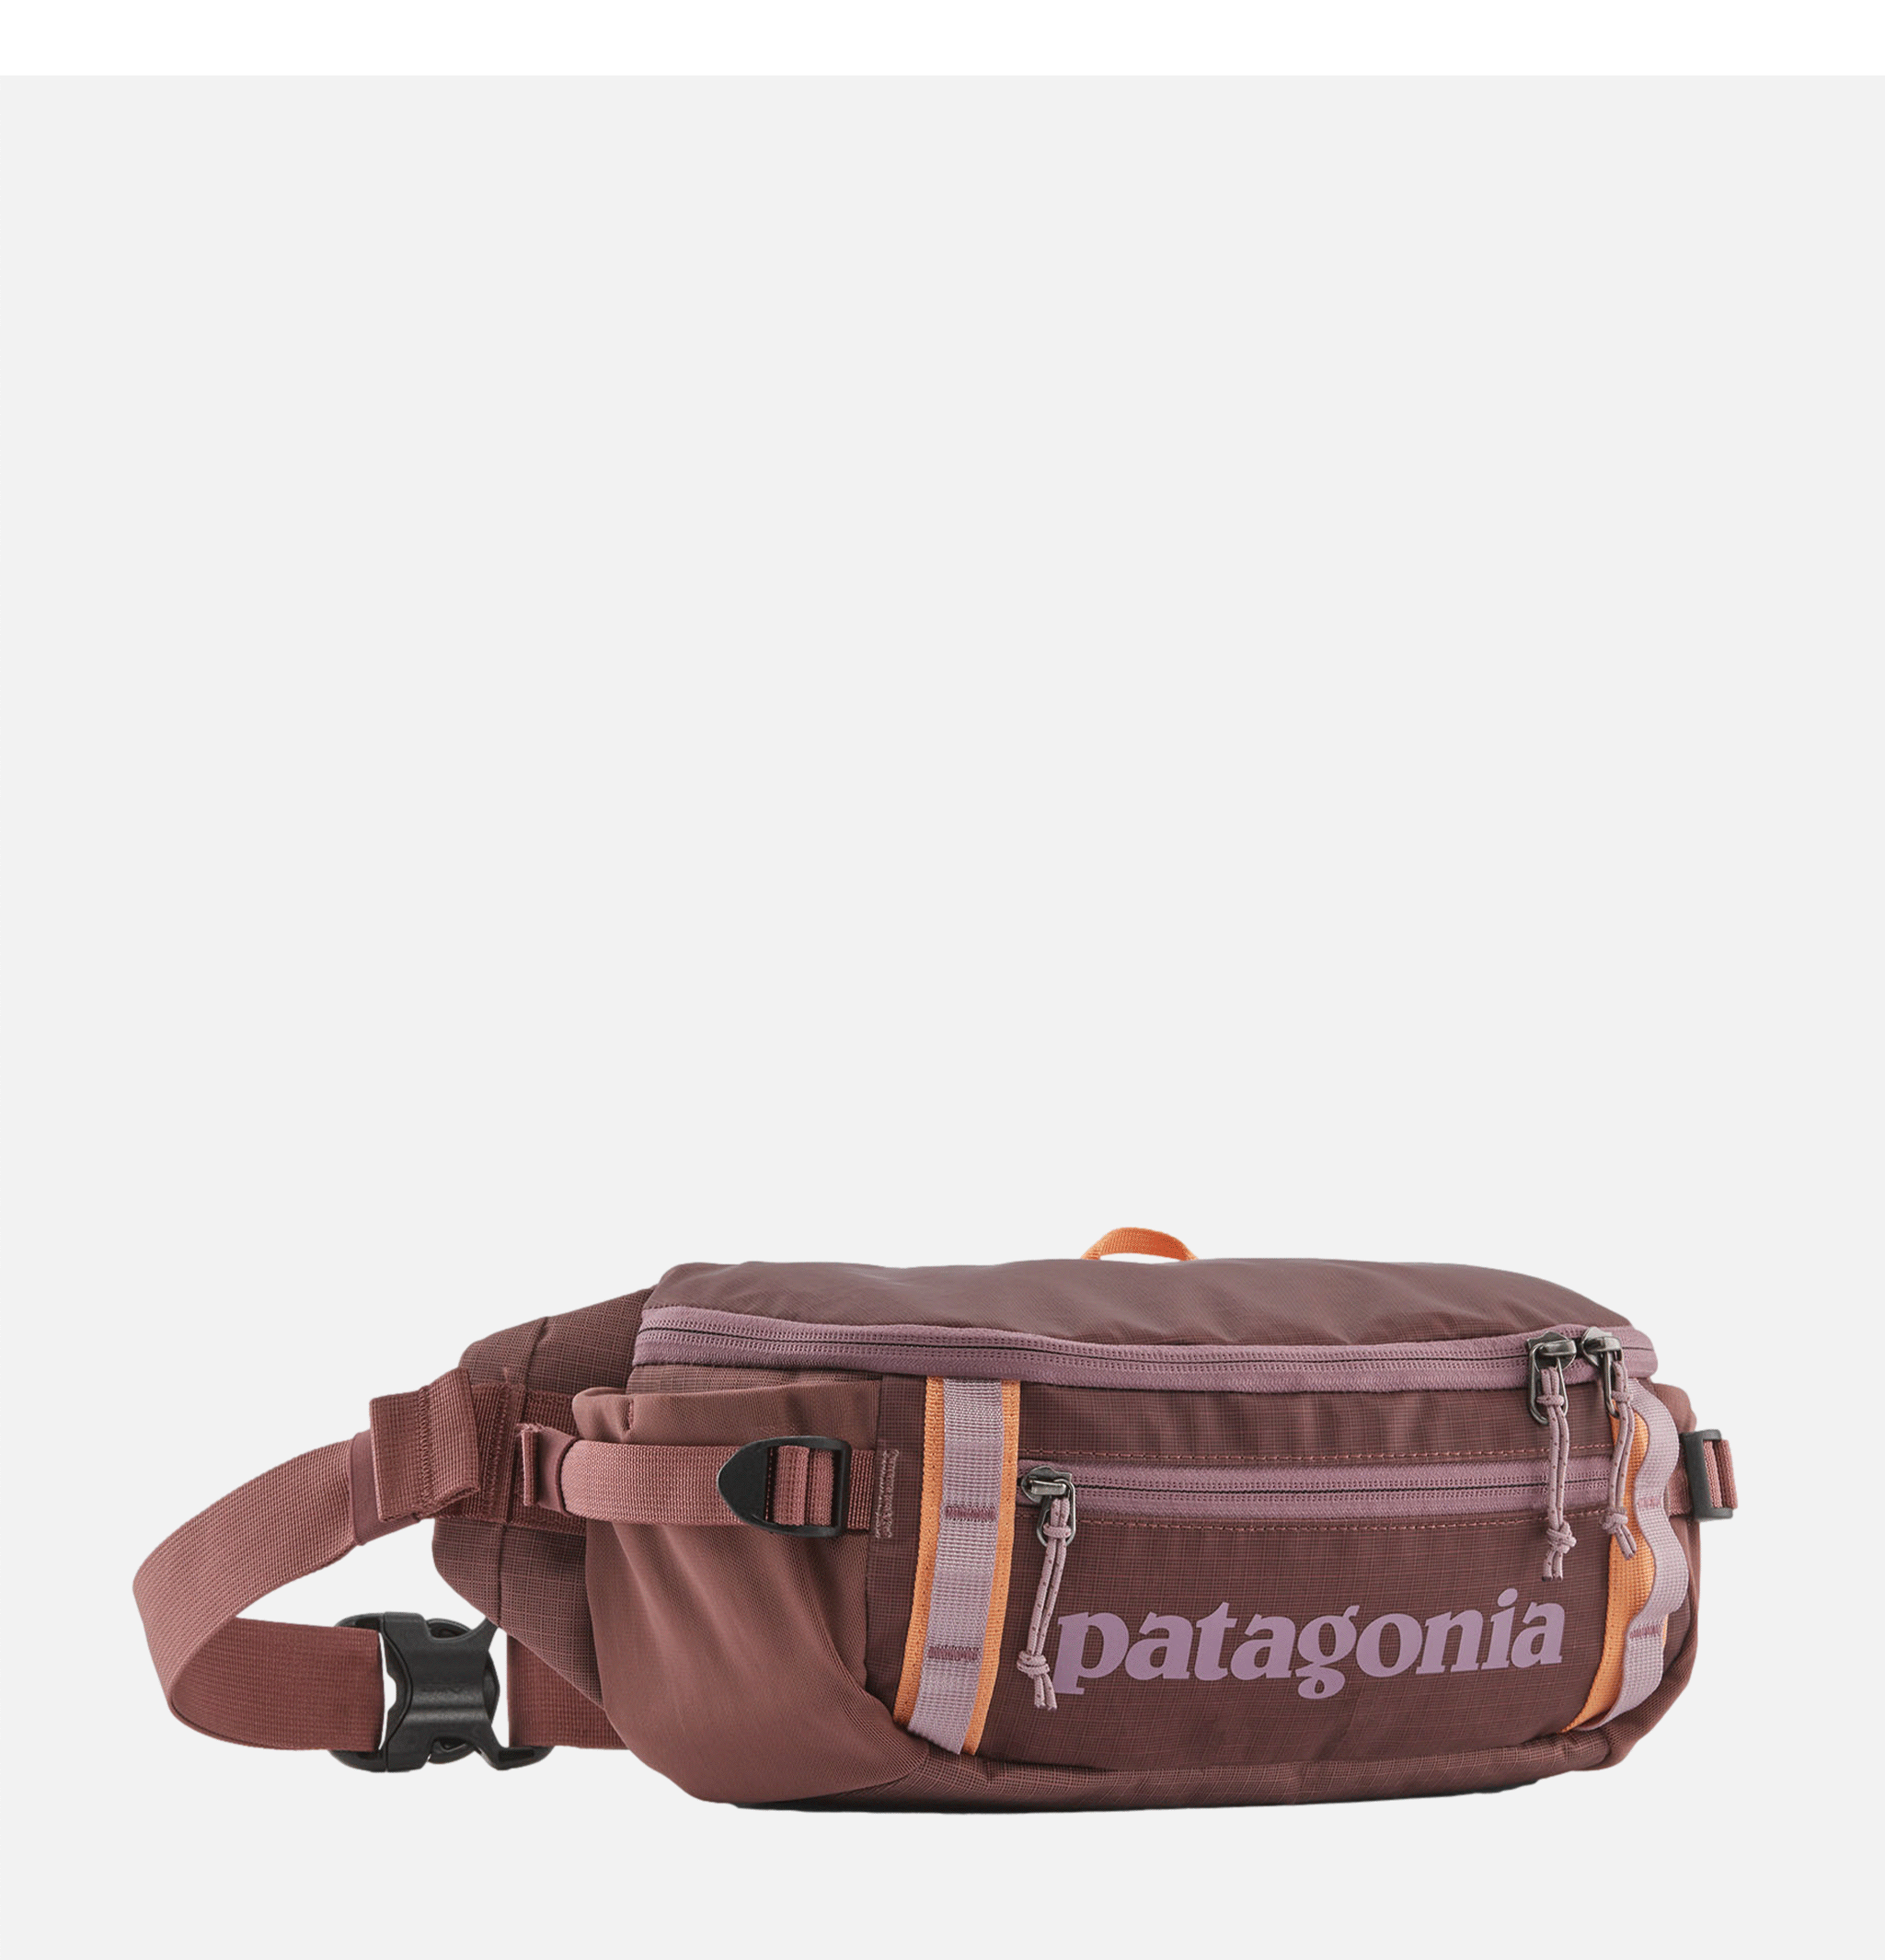 Black Hole® Waist Pack DLMA Patagonia Accessories